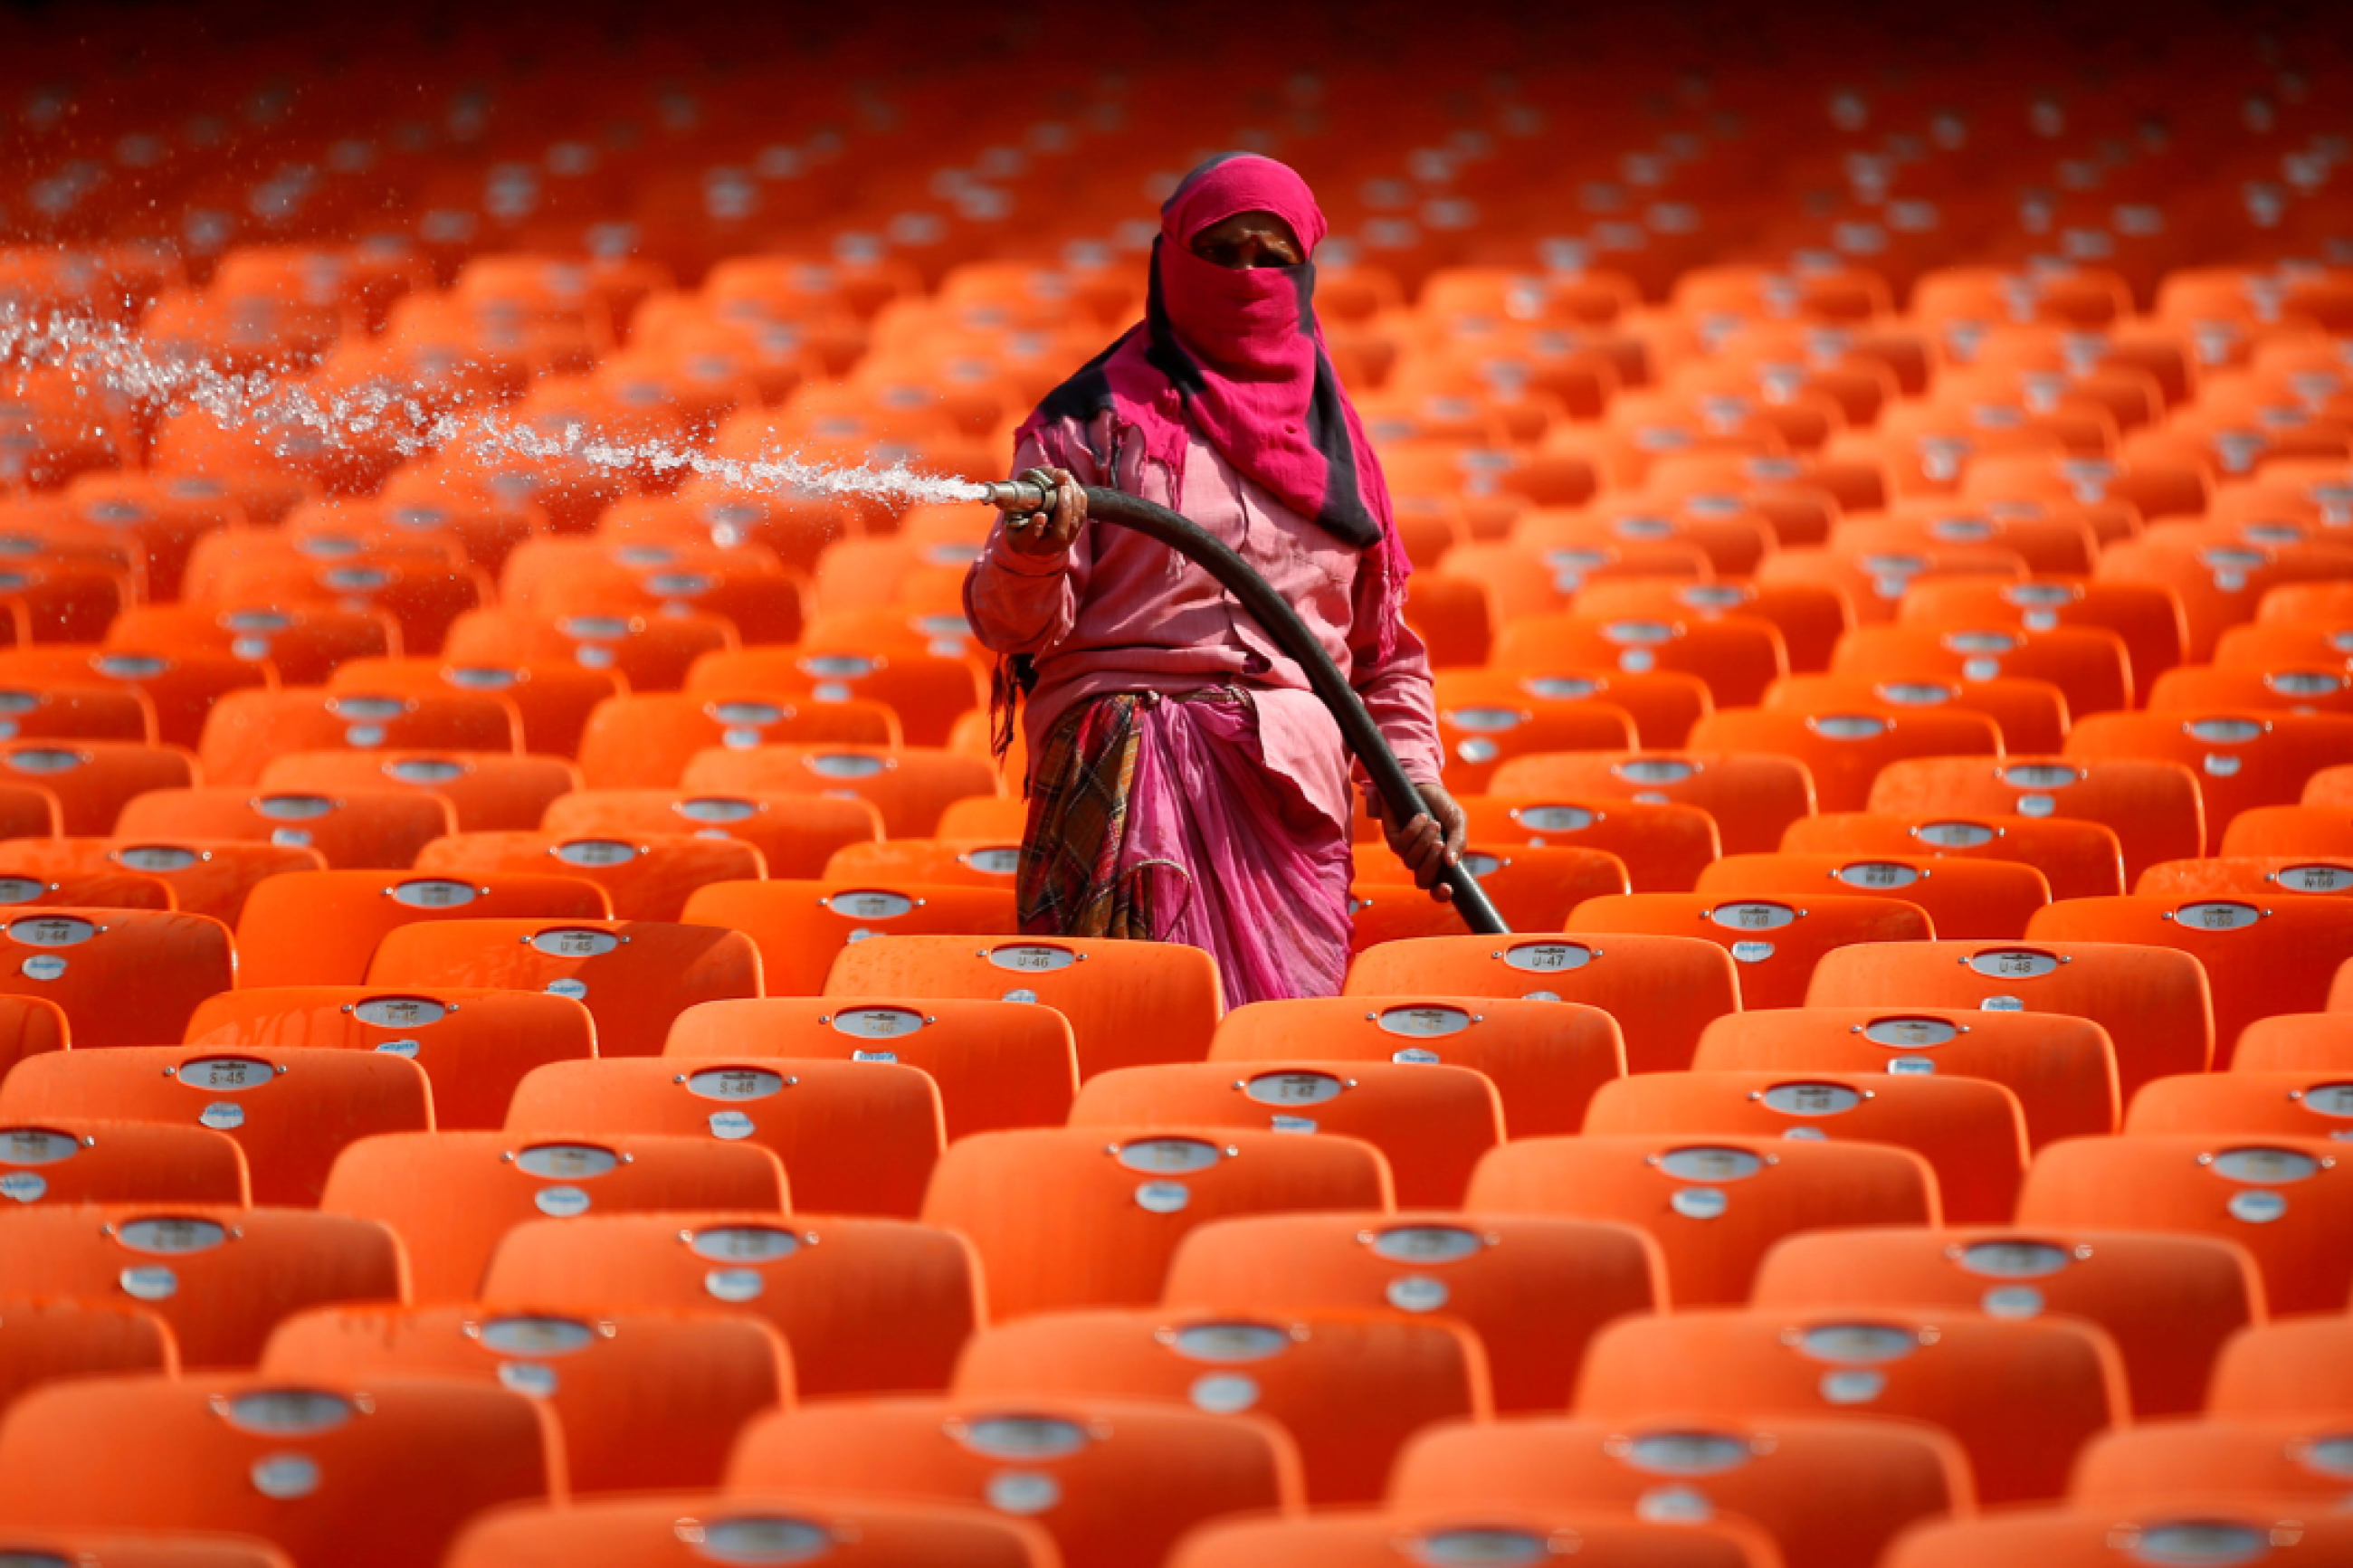 A worker hoses down bright orange seats in the stands at Sardar Patel Gujarat Stadium, during the COVID-19 pandemic, in Ahmedabad India, on February 17, 2021. 